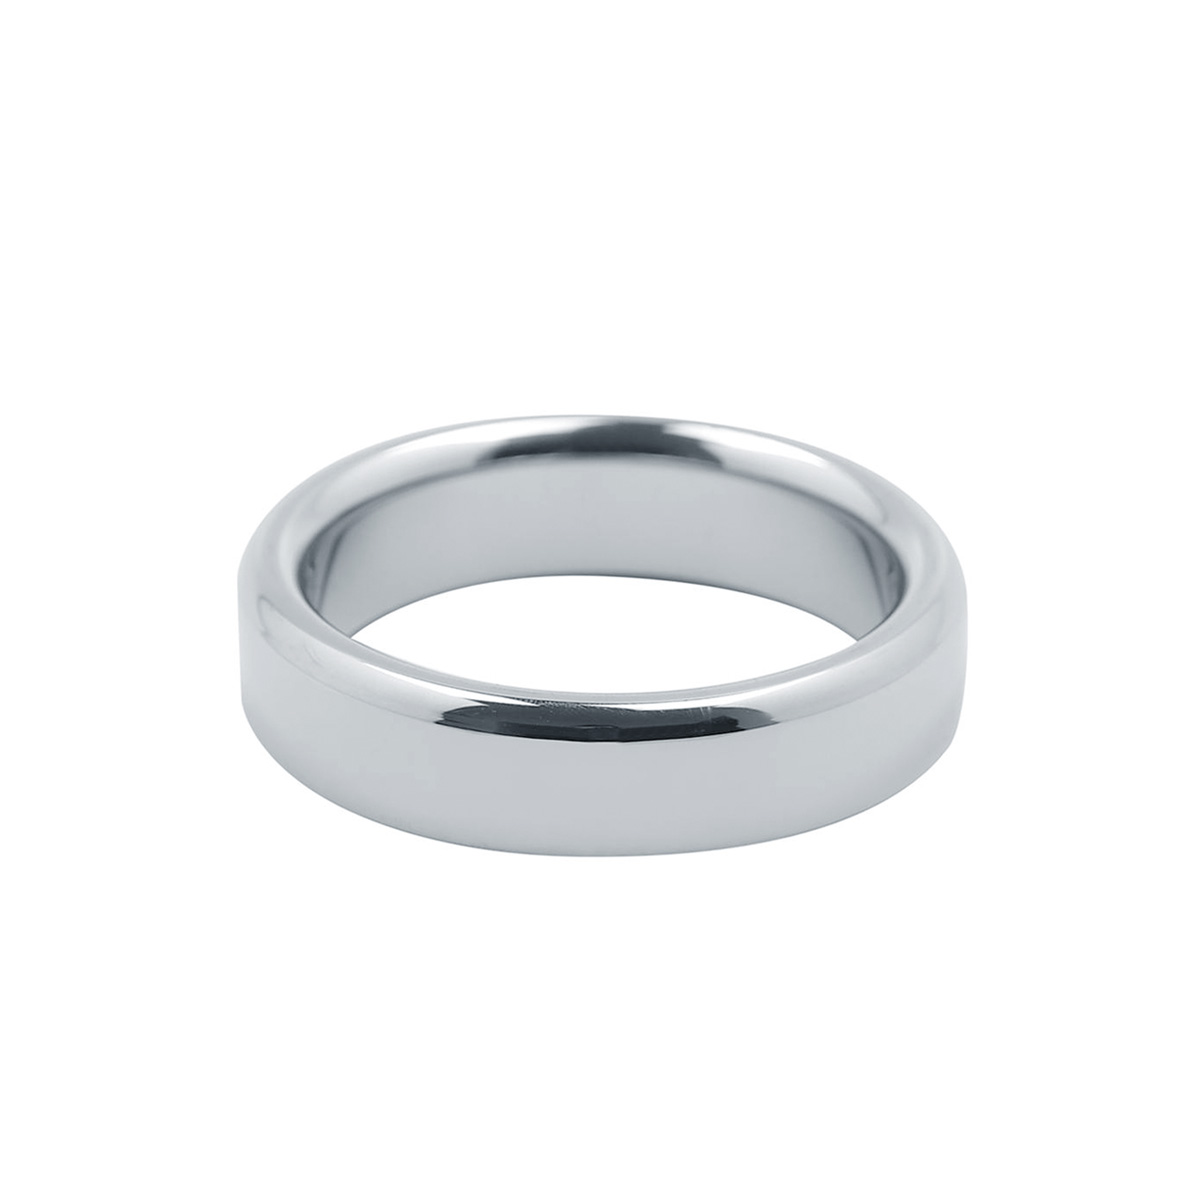 Cockring 4 mm x 12 mm – 52.5 mm